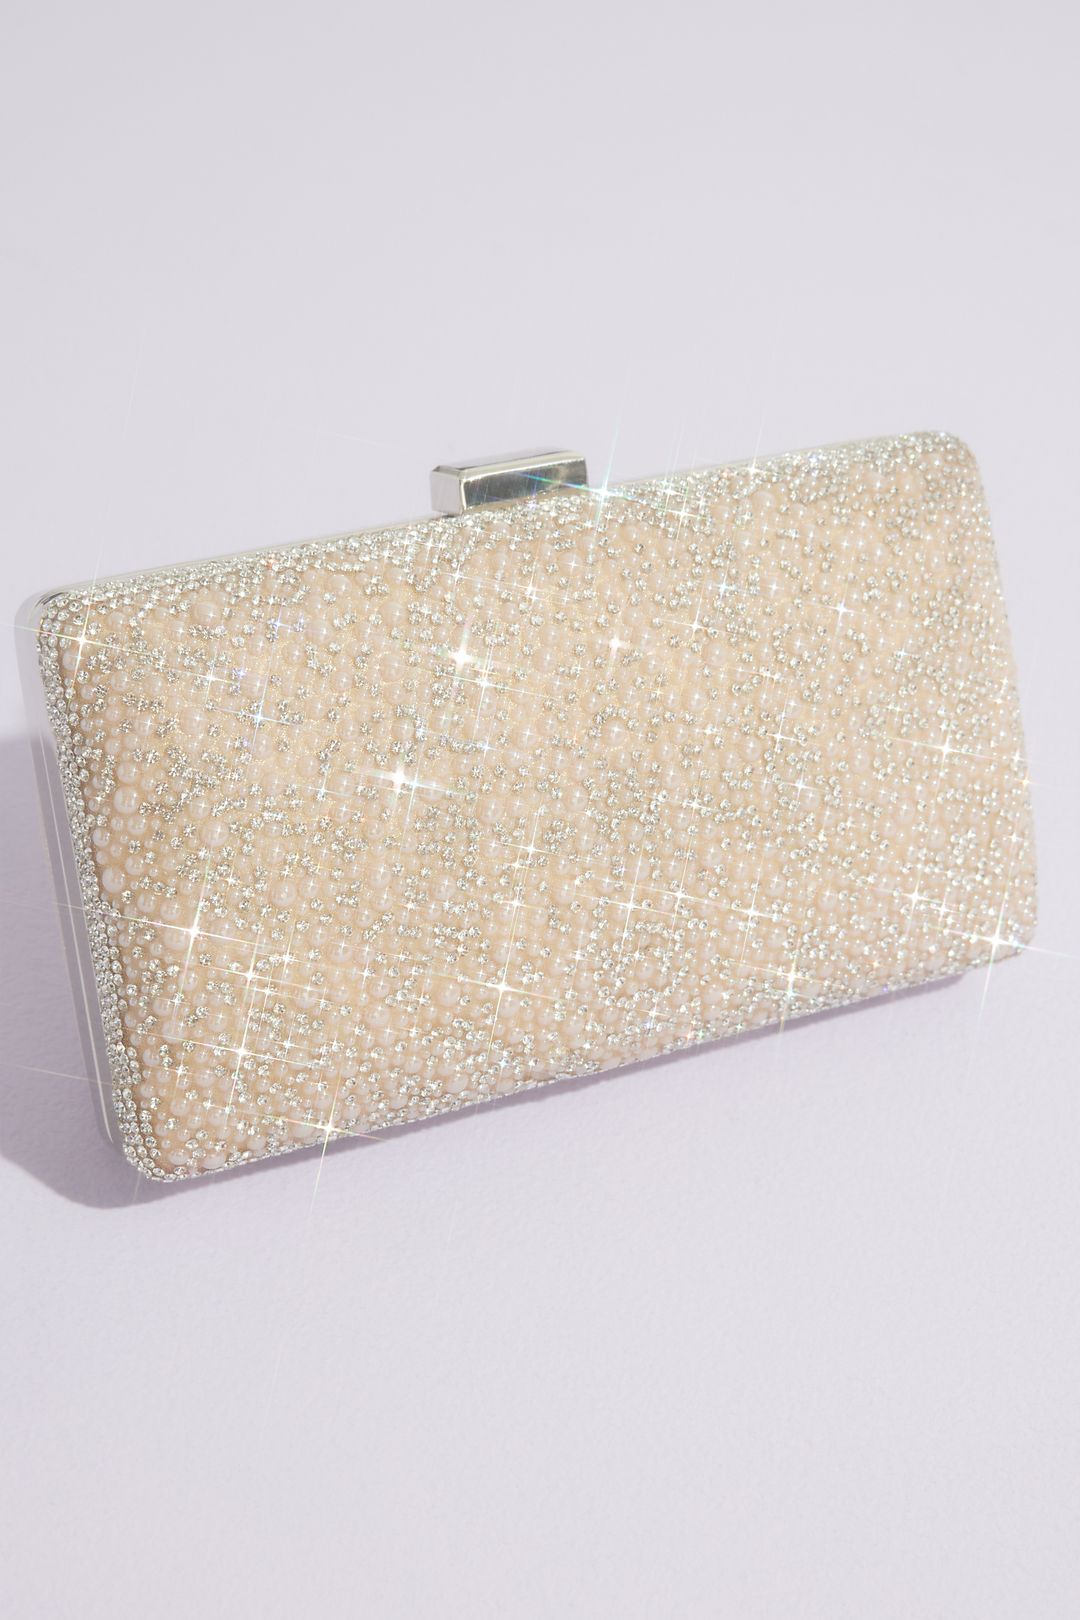 Rhinestone Embellished Clutch Purse Evening Bag with Chain Strap - Gold  Iridescent